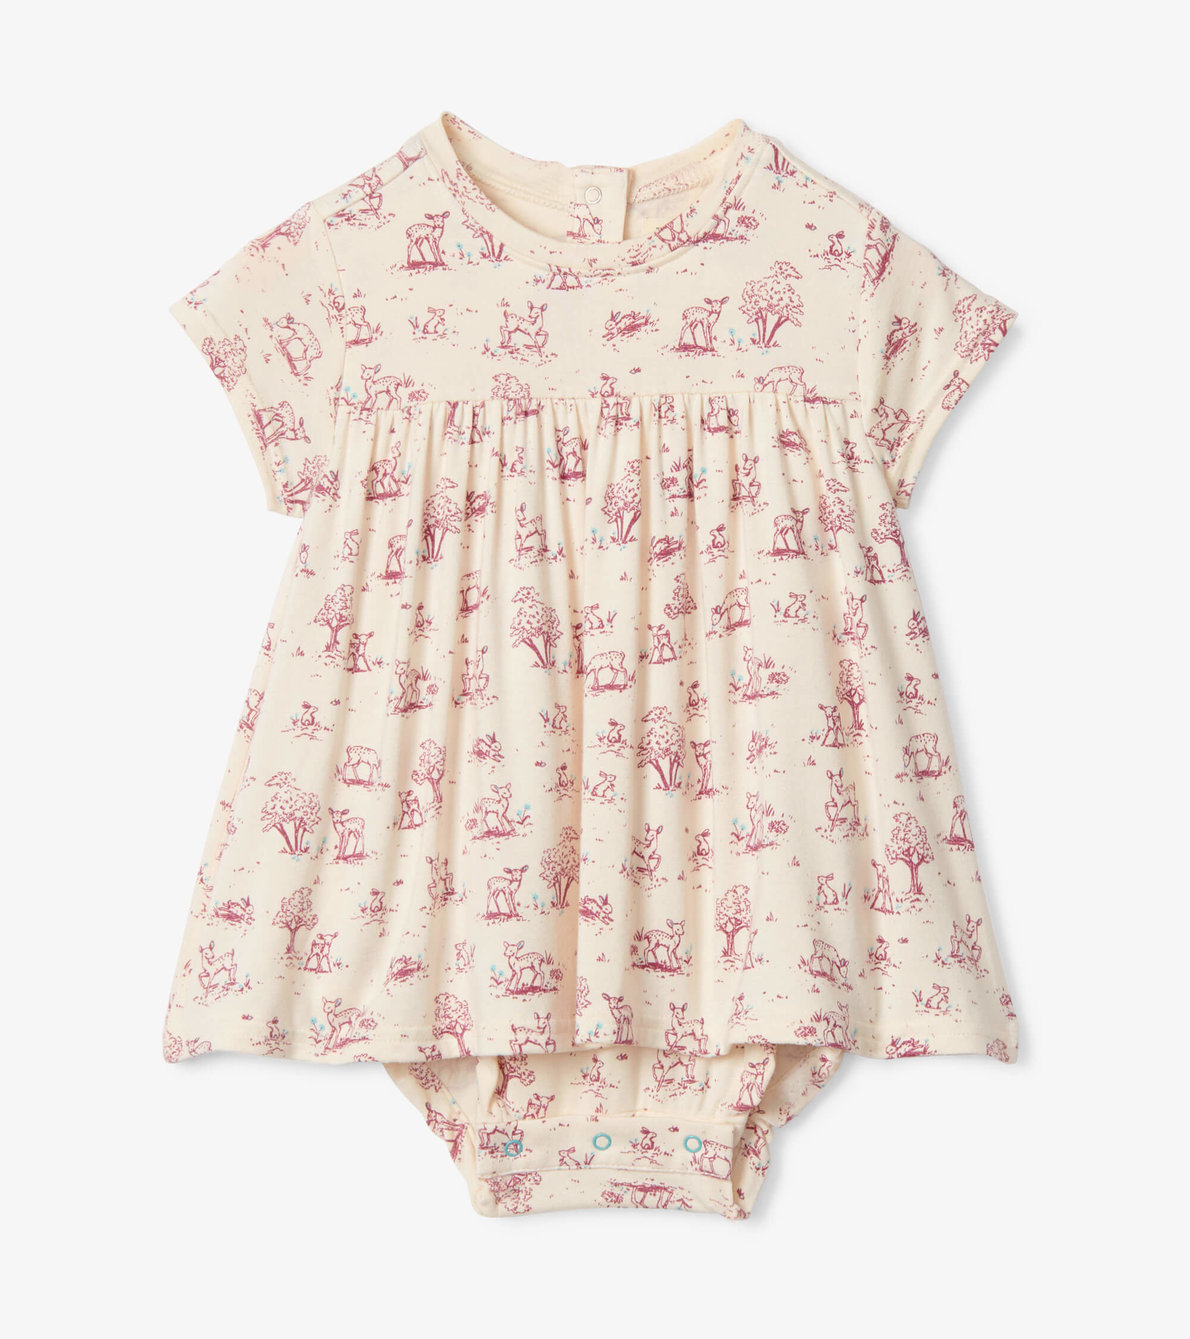 View larger image of Tender Toile Baby One Piece Dress